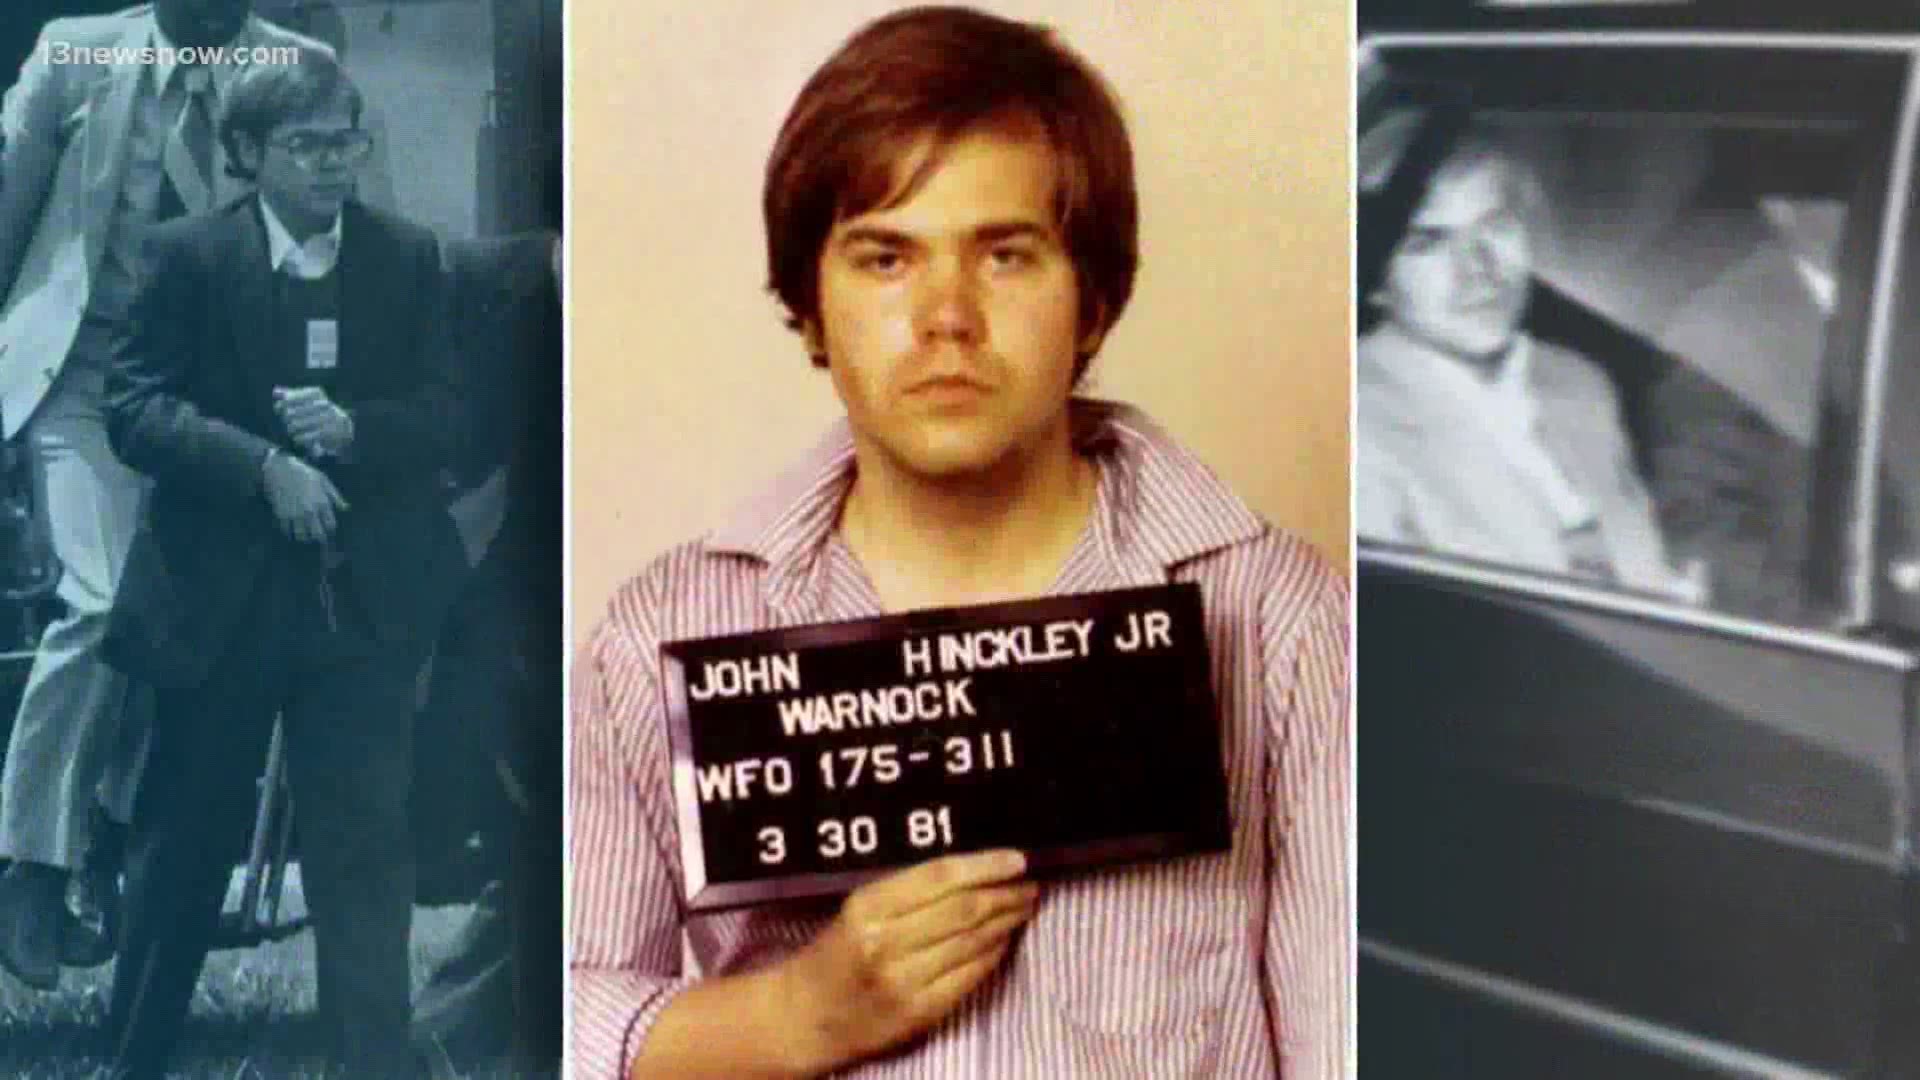 John Hinckley has been living under increasingly fewer restrictions in a gated community in Williamsburg. He shot and wounded President Ronald Reagan in 1981.